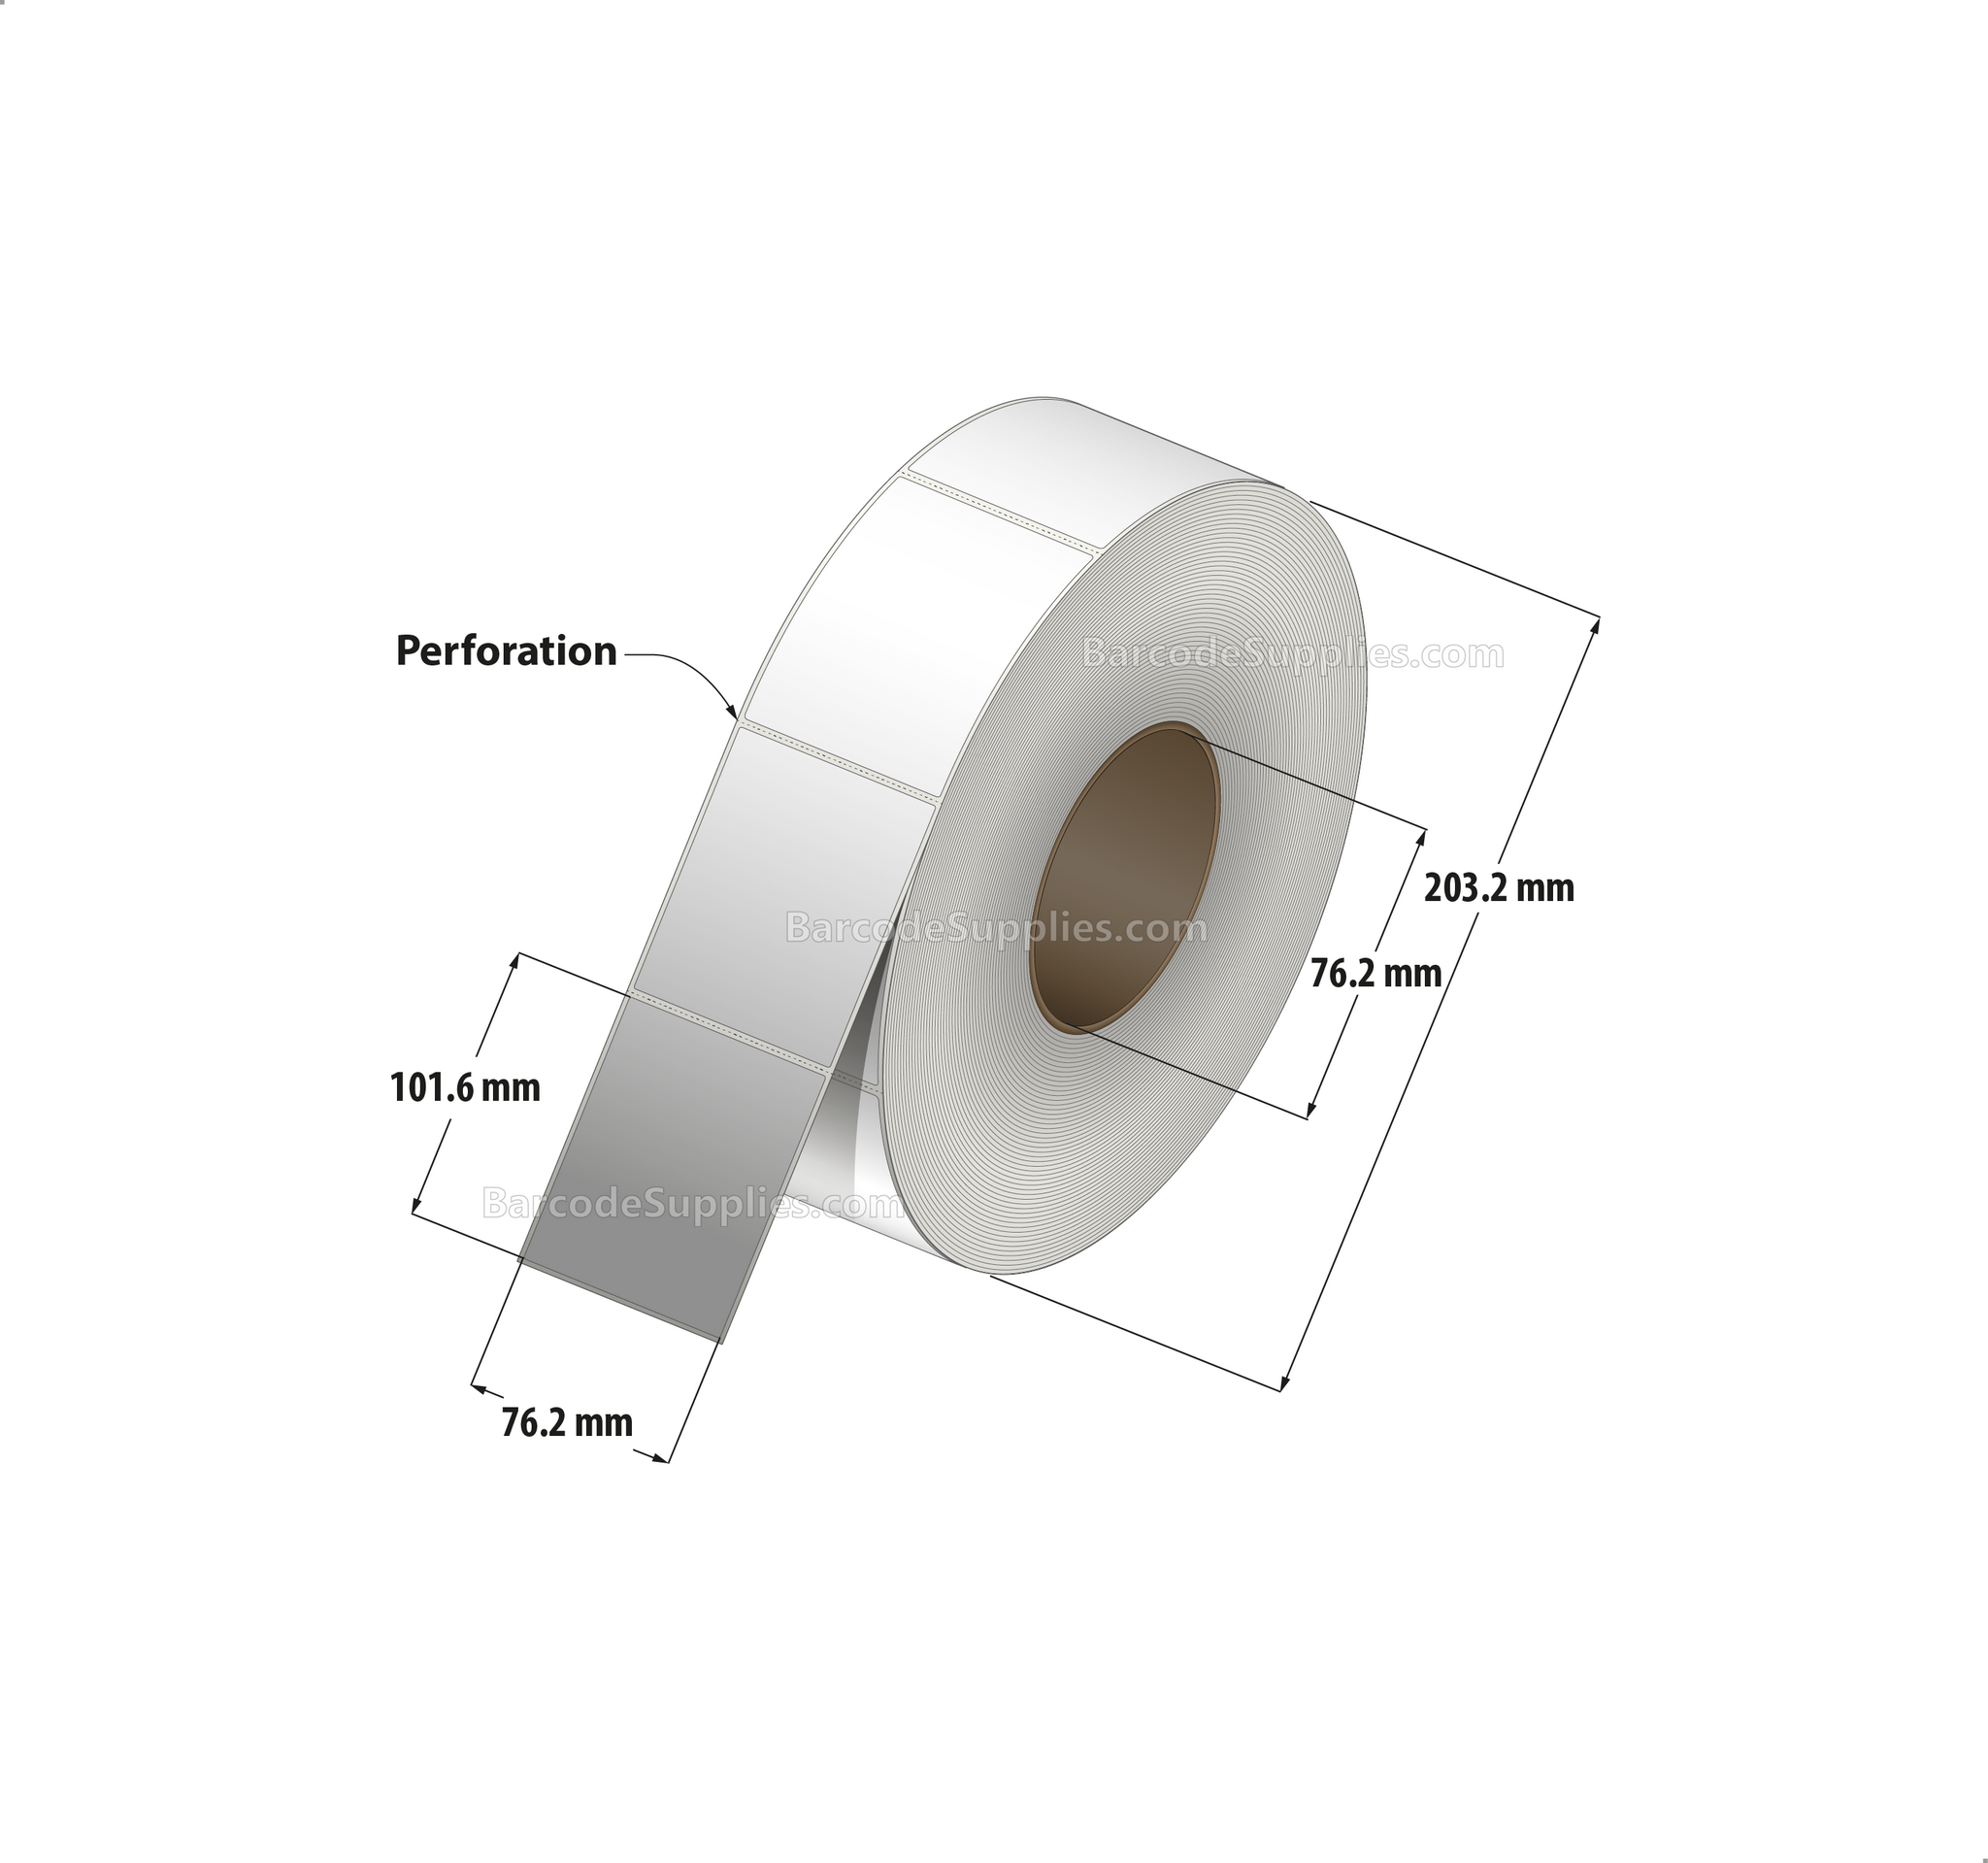 3 x 4 Thermal Transfer White Labels With Permanent Adhesive - Perforated - 1500 Labels Per Roll - Carton Of 8 Rolls - 12000 Labels Total - MPN: RT-3-4-1500-3